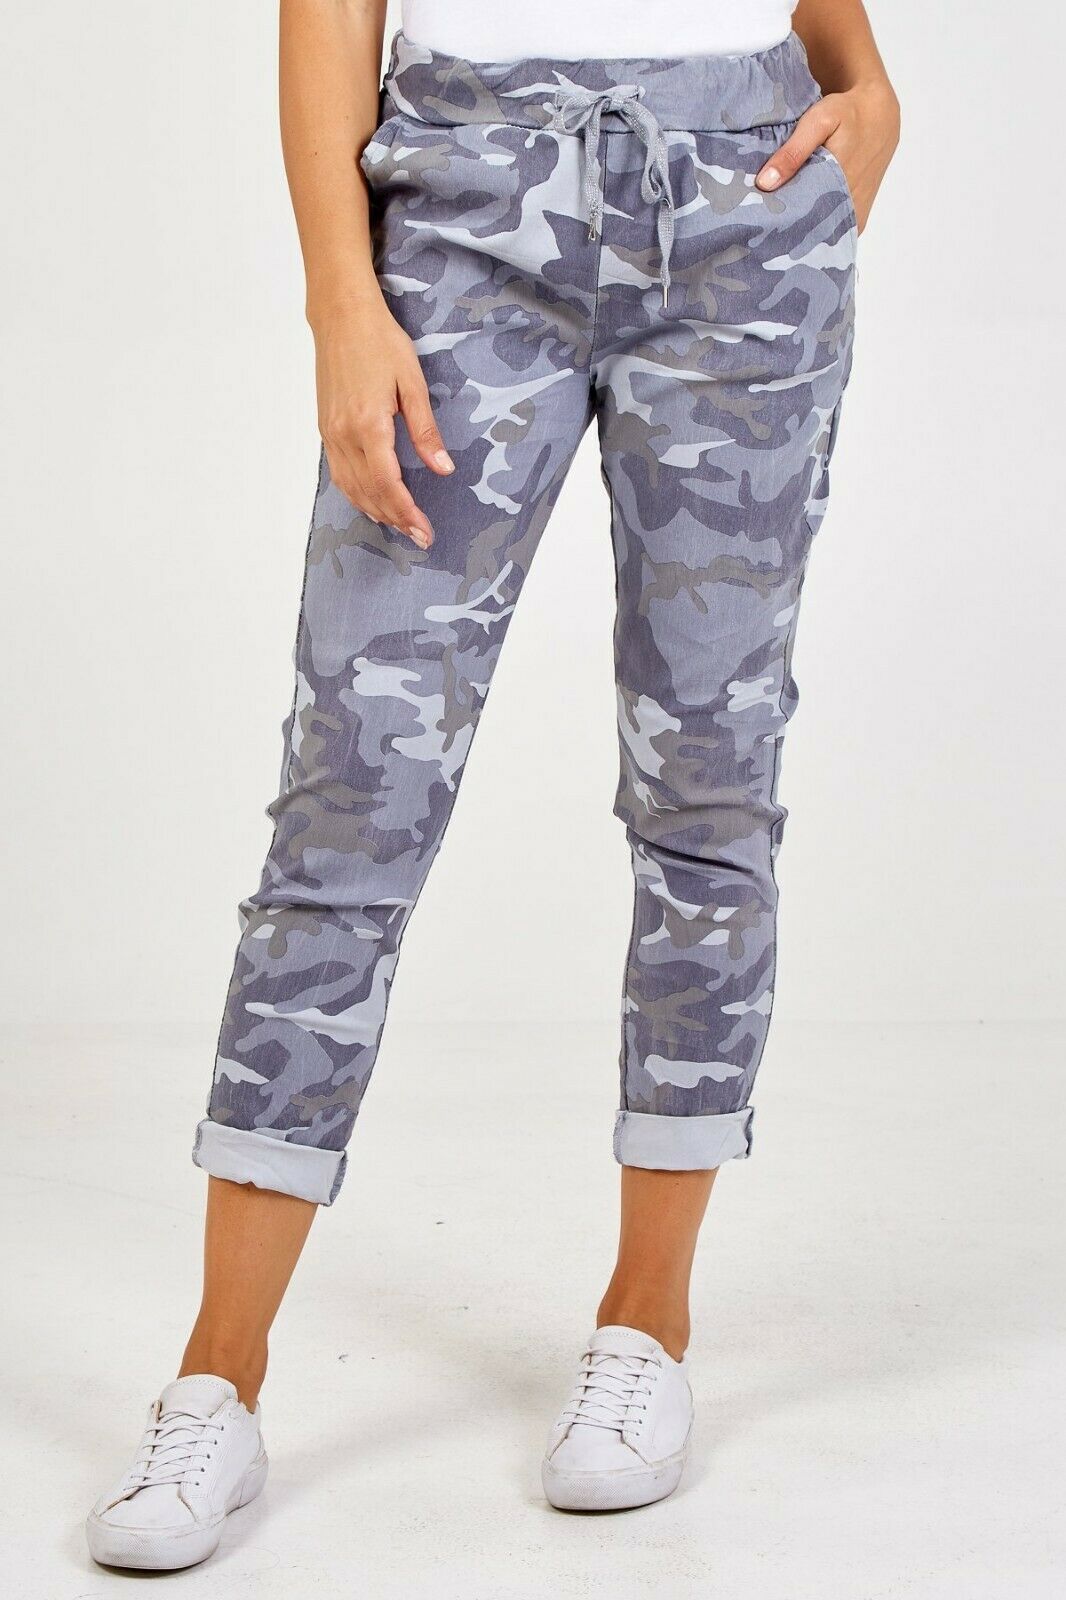 Ladies "Magic" Light Blue Camouflage Trousers.